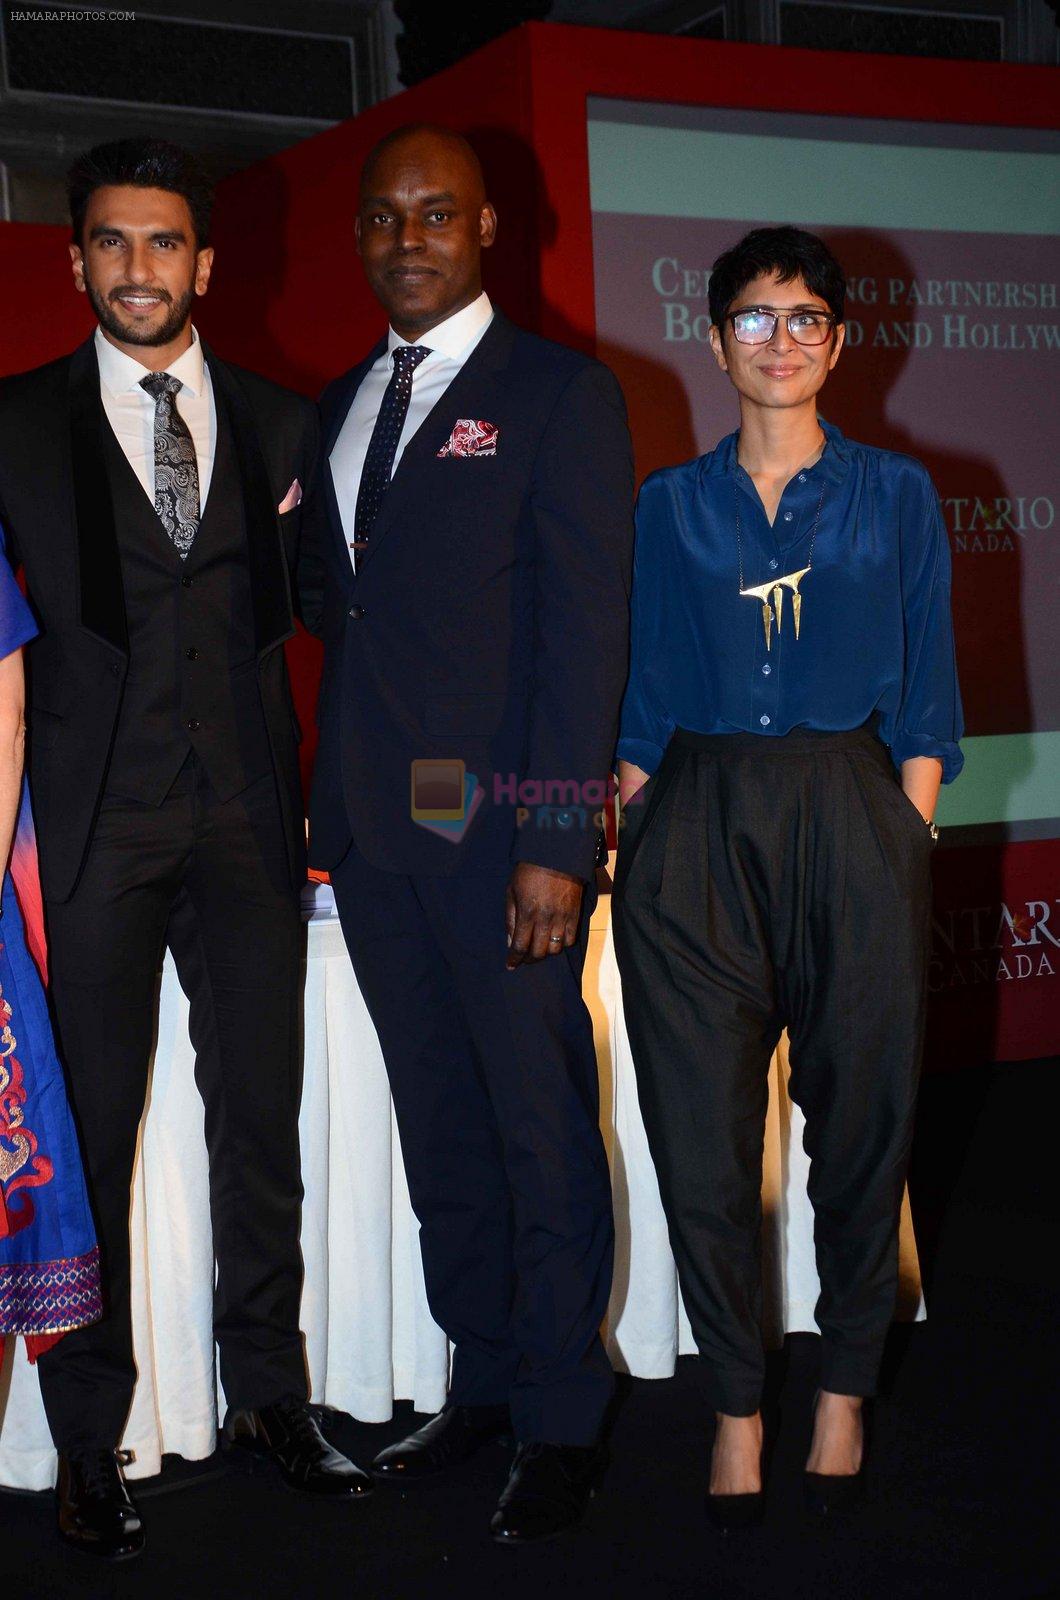 Ranveer Singh and Kiran Rao at Toronto's MOU with Film City on 5th Feb 2016